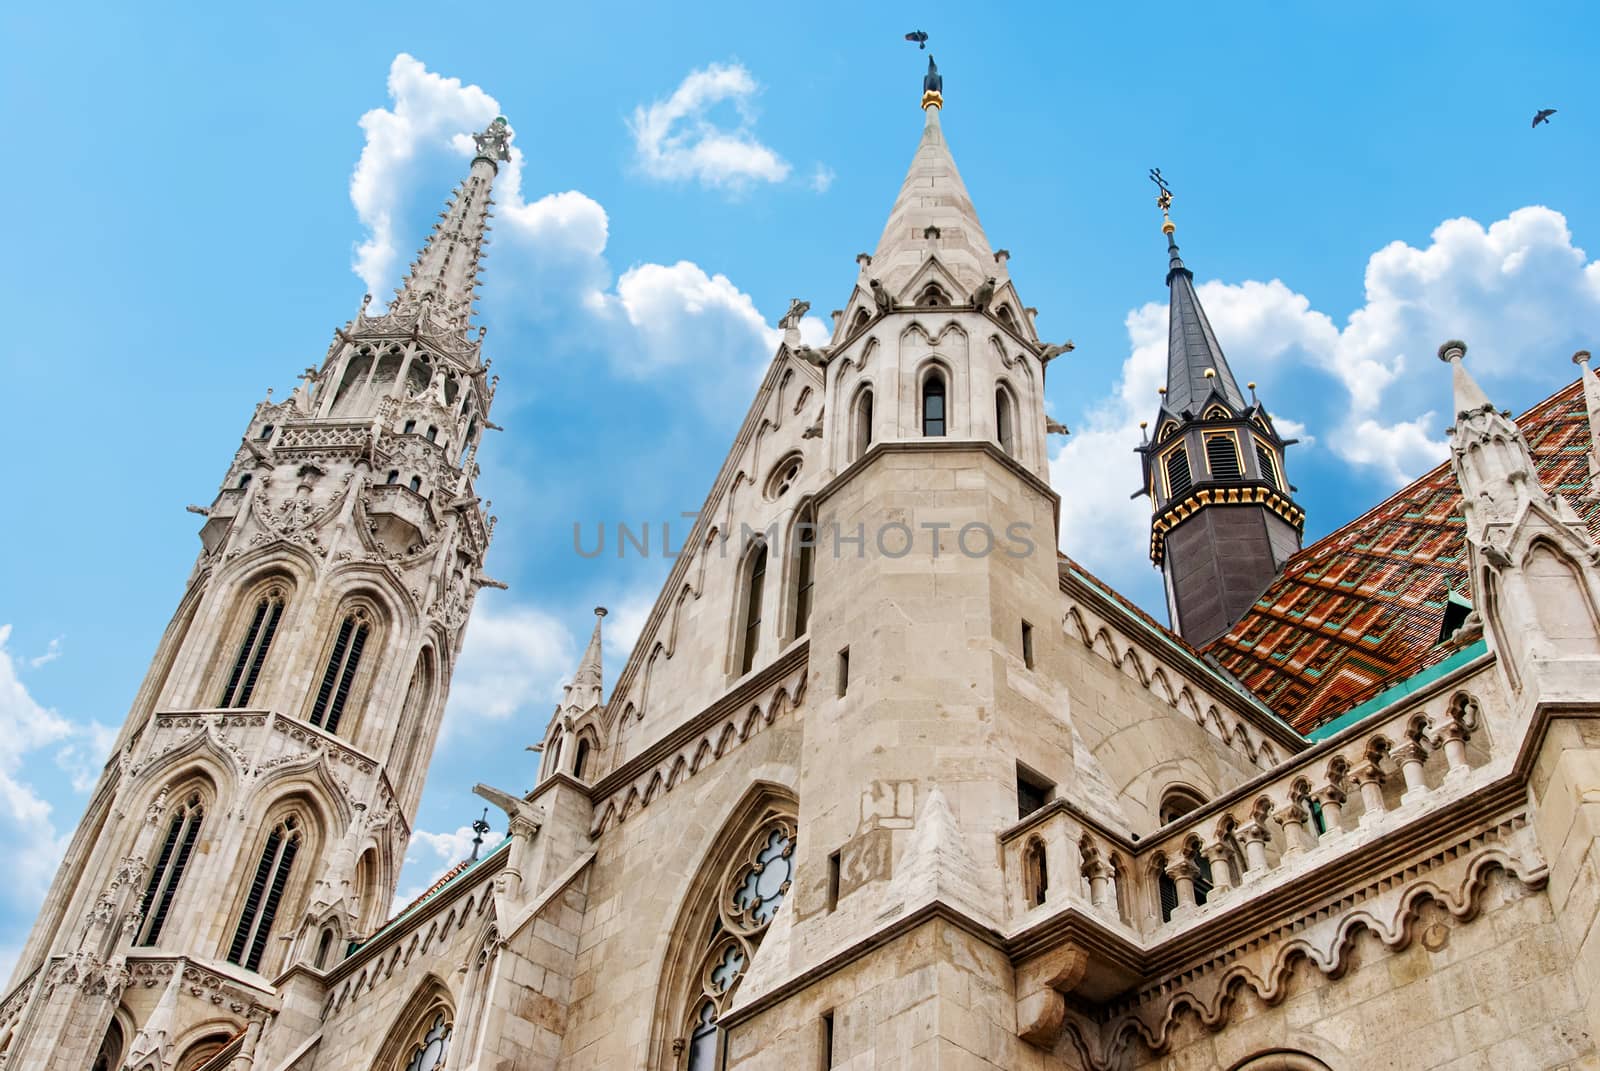 Budapest, Hungary. Matthias or Parish Church of Our Lady Mary was built in 13th century, now in Neo-Gothic architecture style landmark of hungarian country.